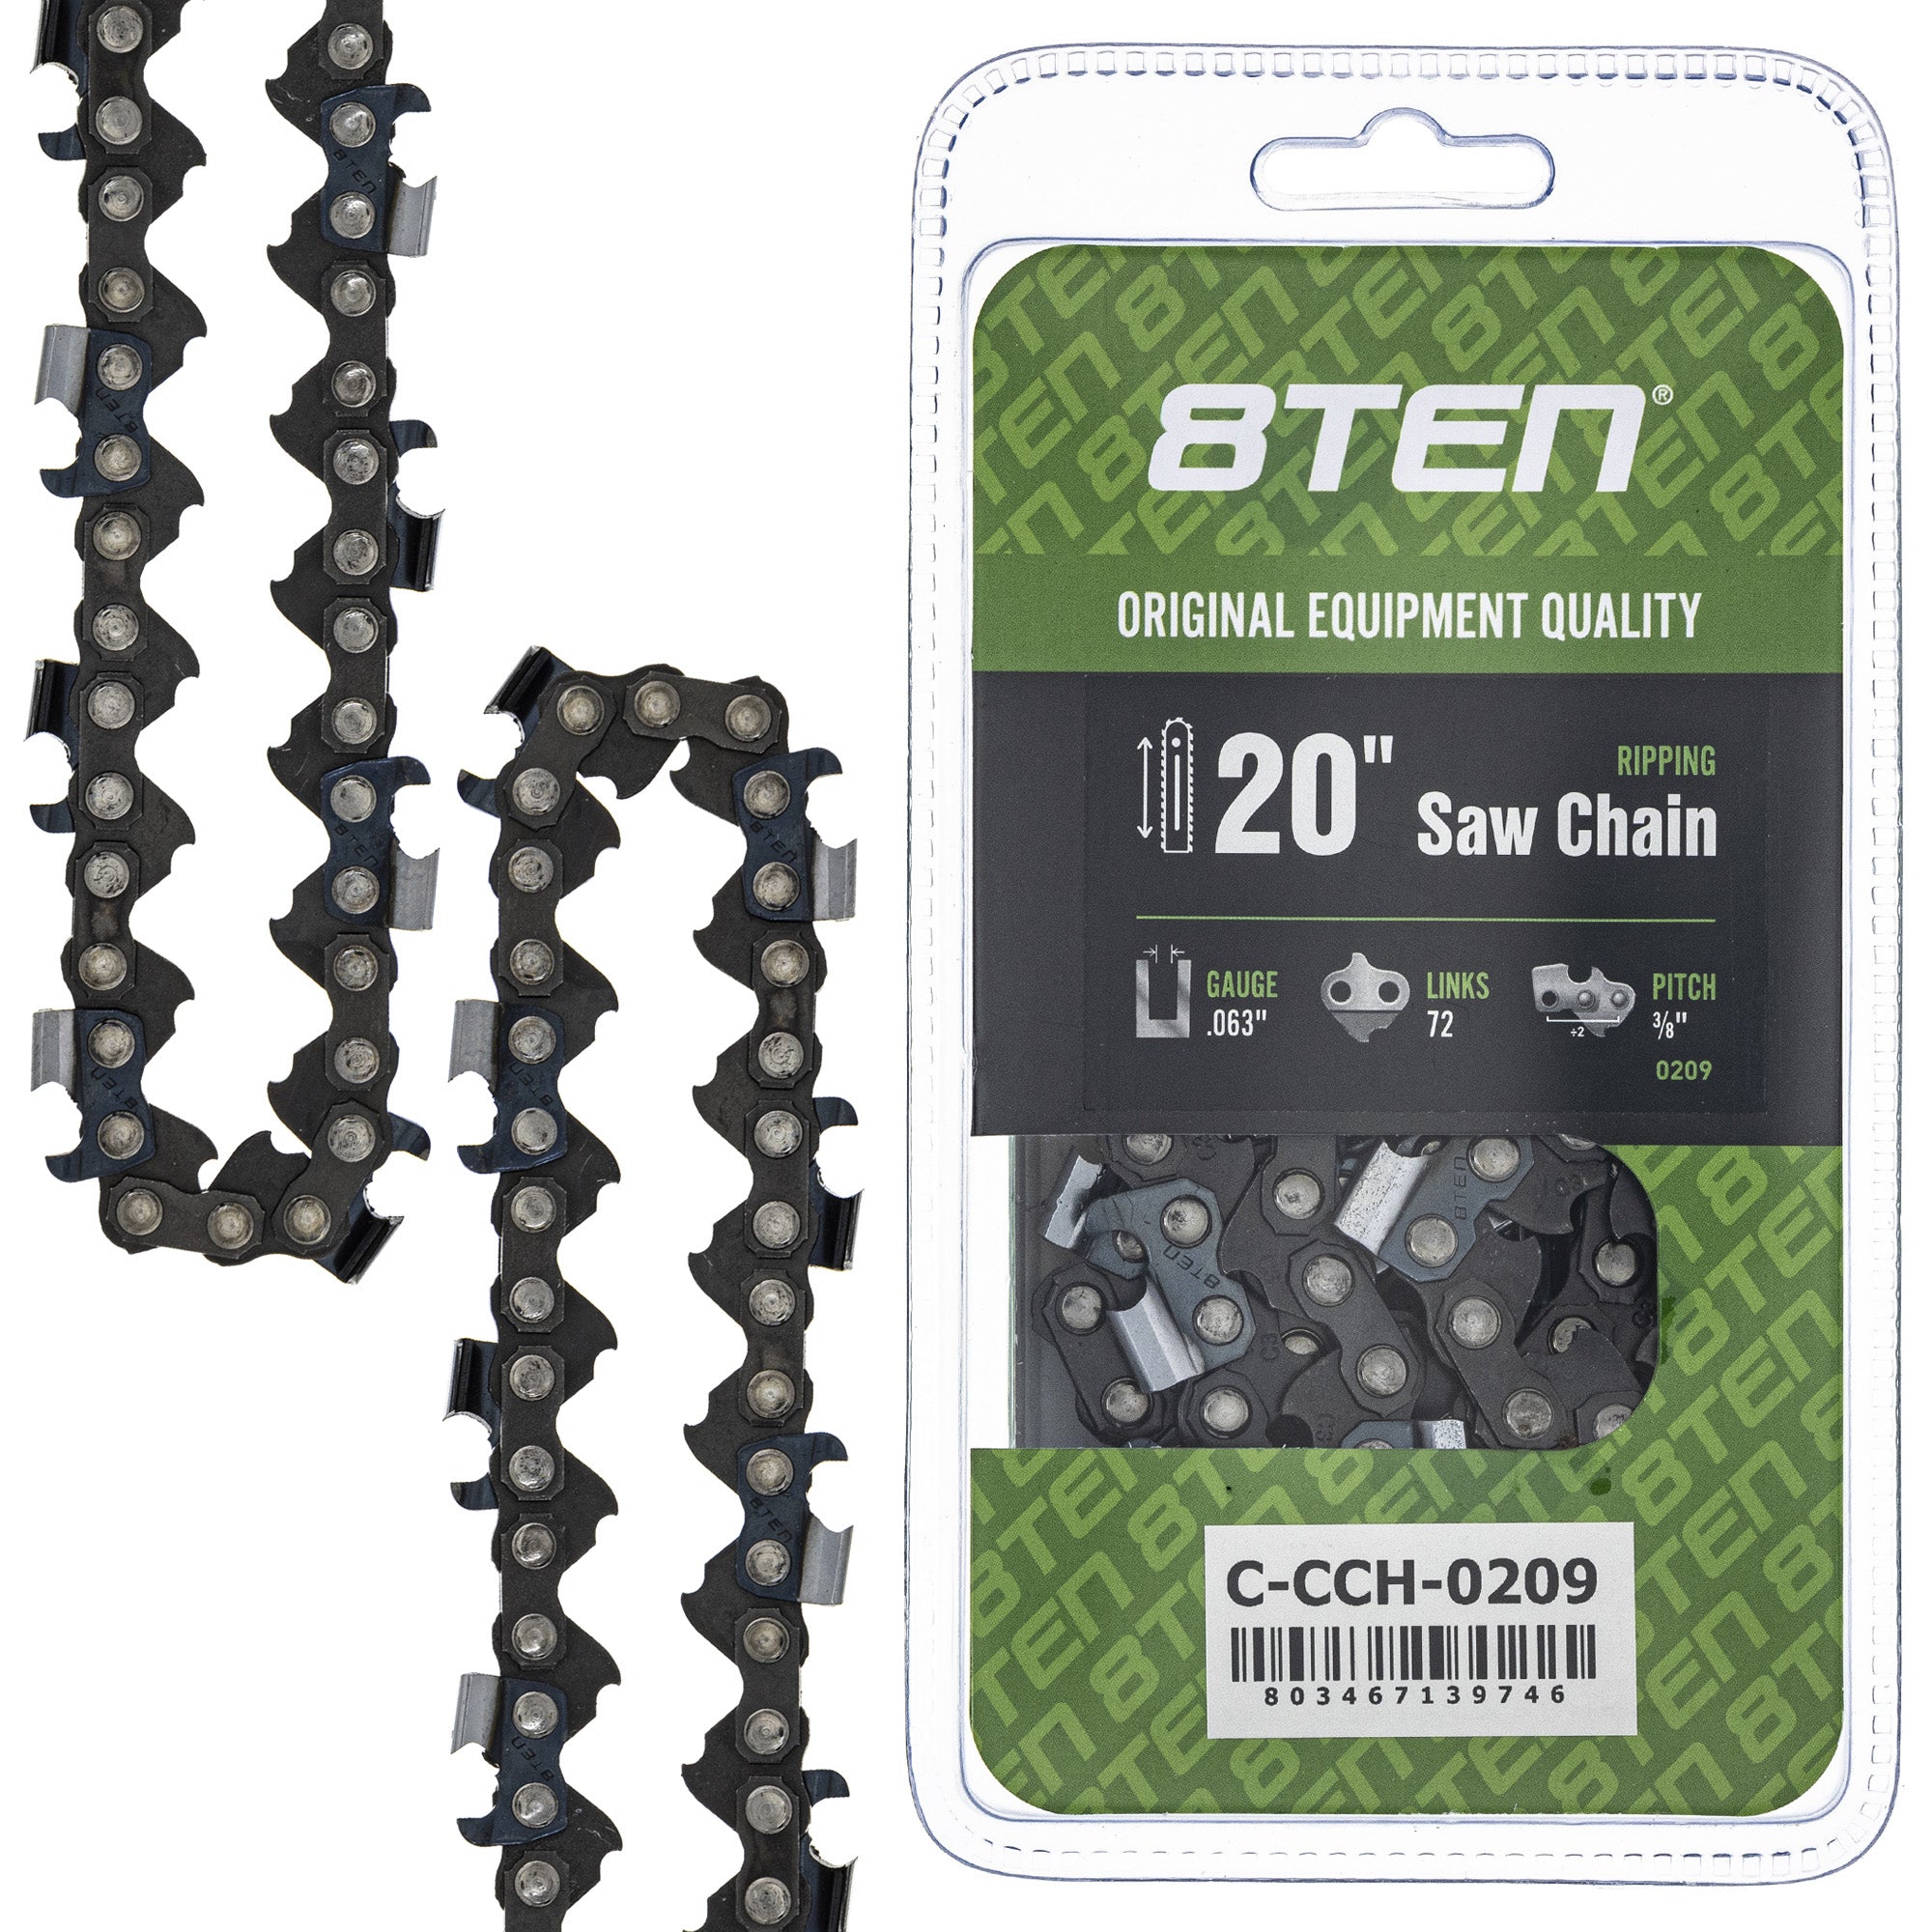 8TEN MK1010414 Guide Bar & Chain for MSE MS E 066